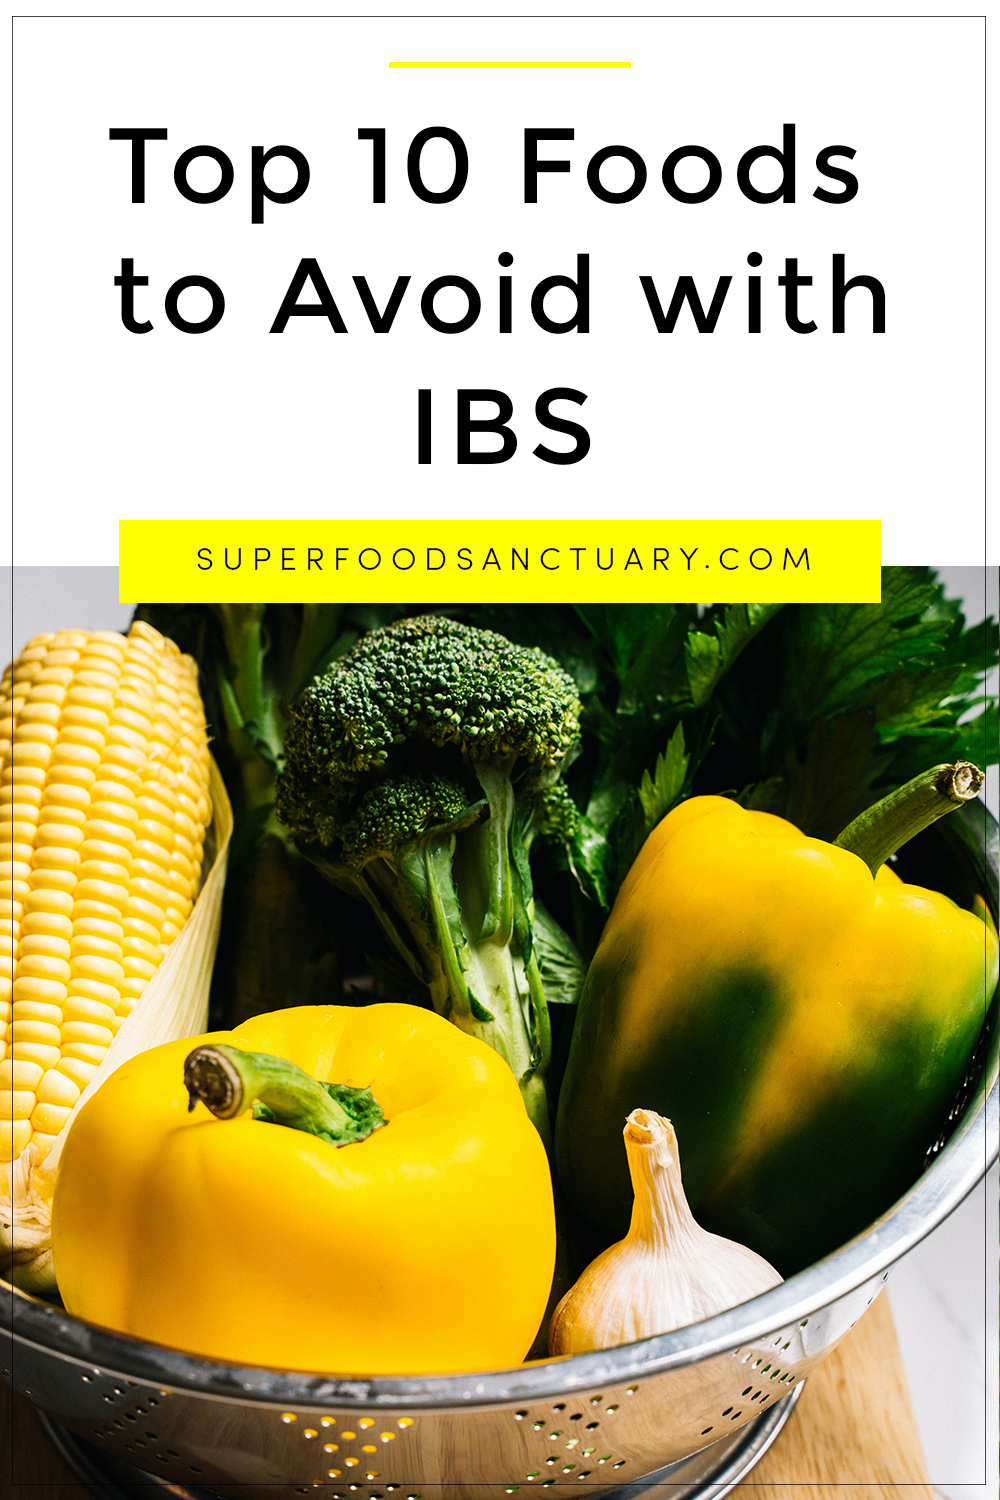 10 Foods to Avoid with IBS (Irritable Bowel Syndrome) Superfood Sanctuary